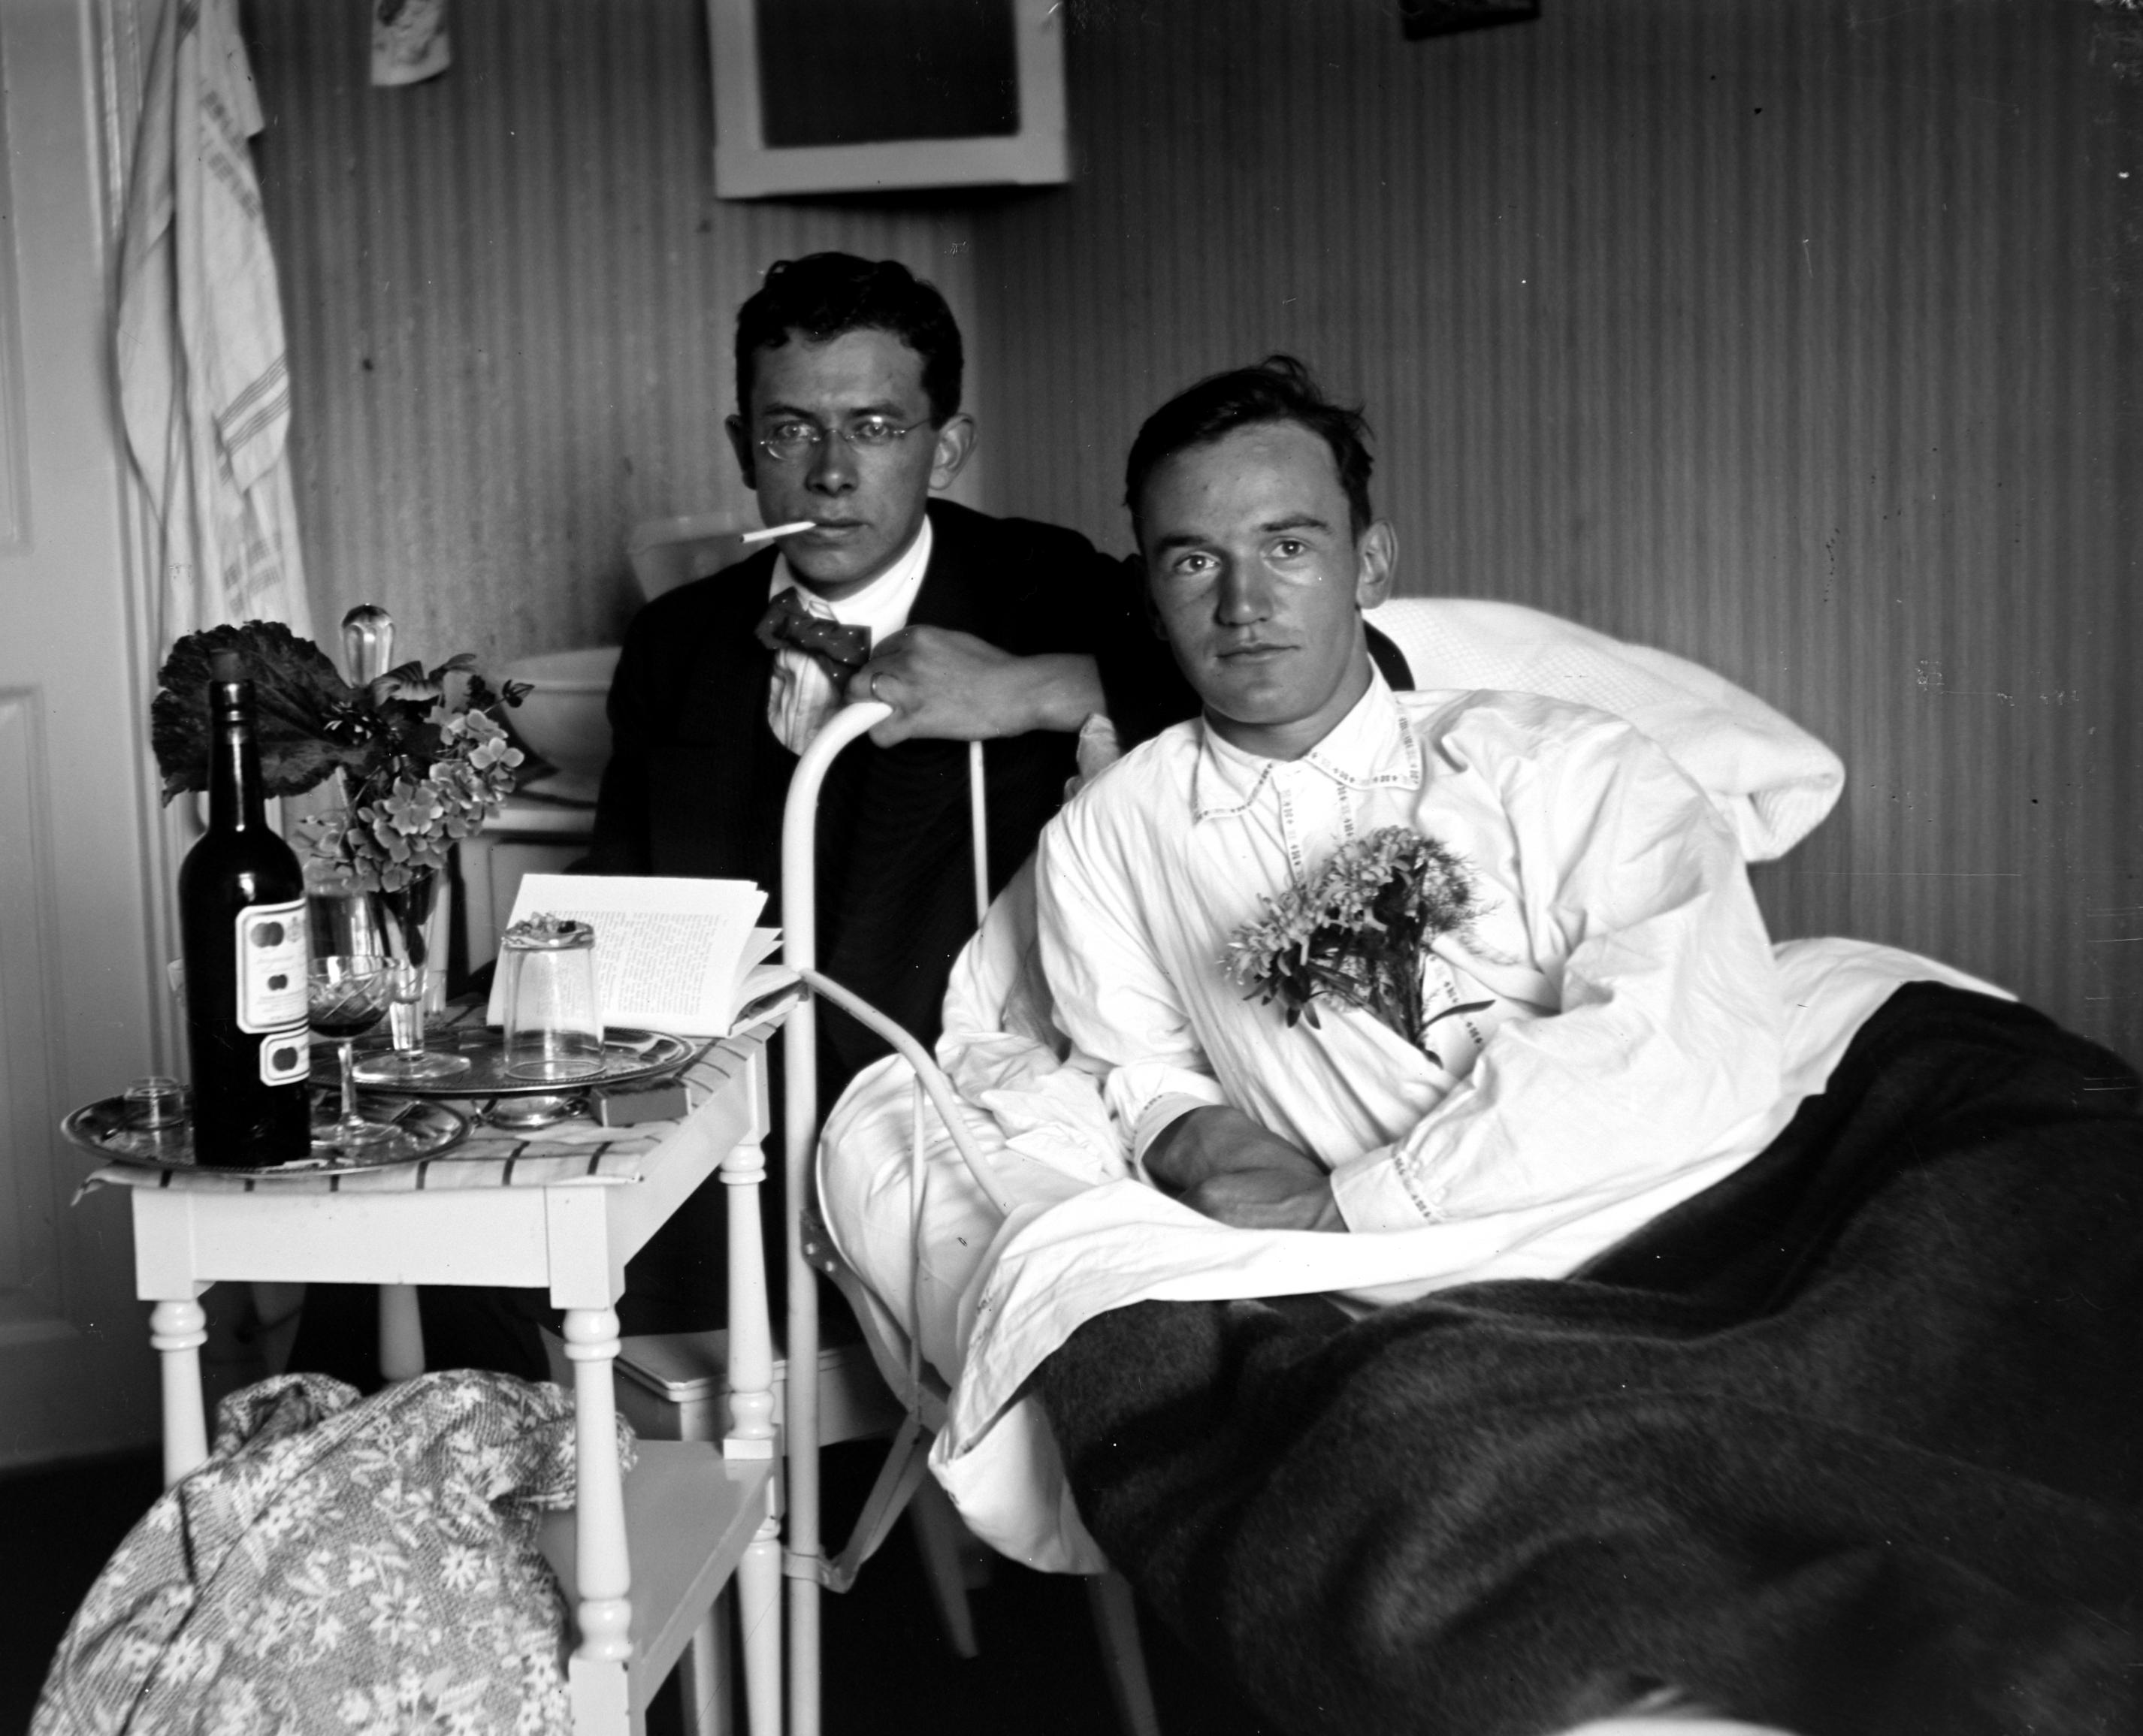 Patient and visitor. Hålahult tuberculosis hospital, Sweden in the 1920's..jpg